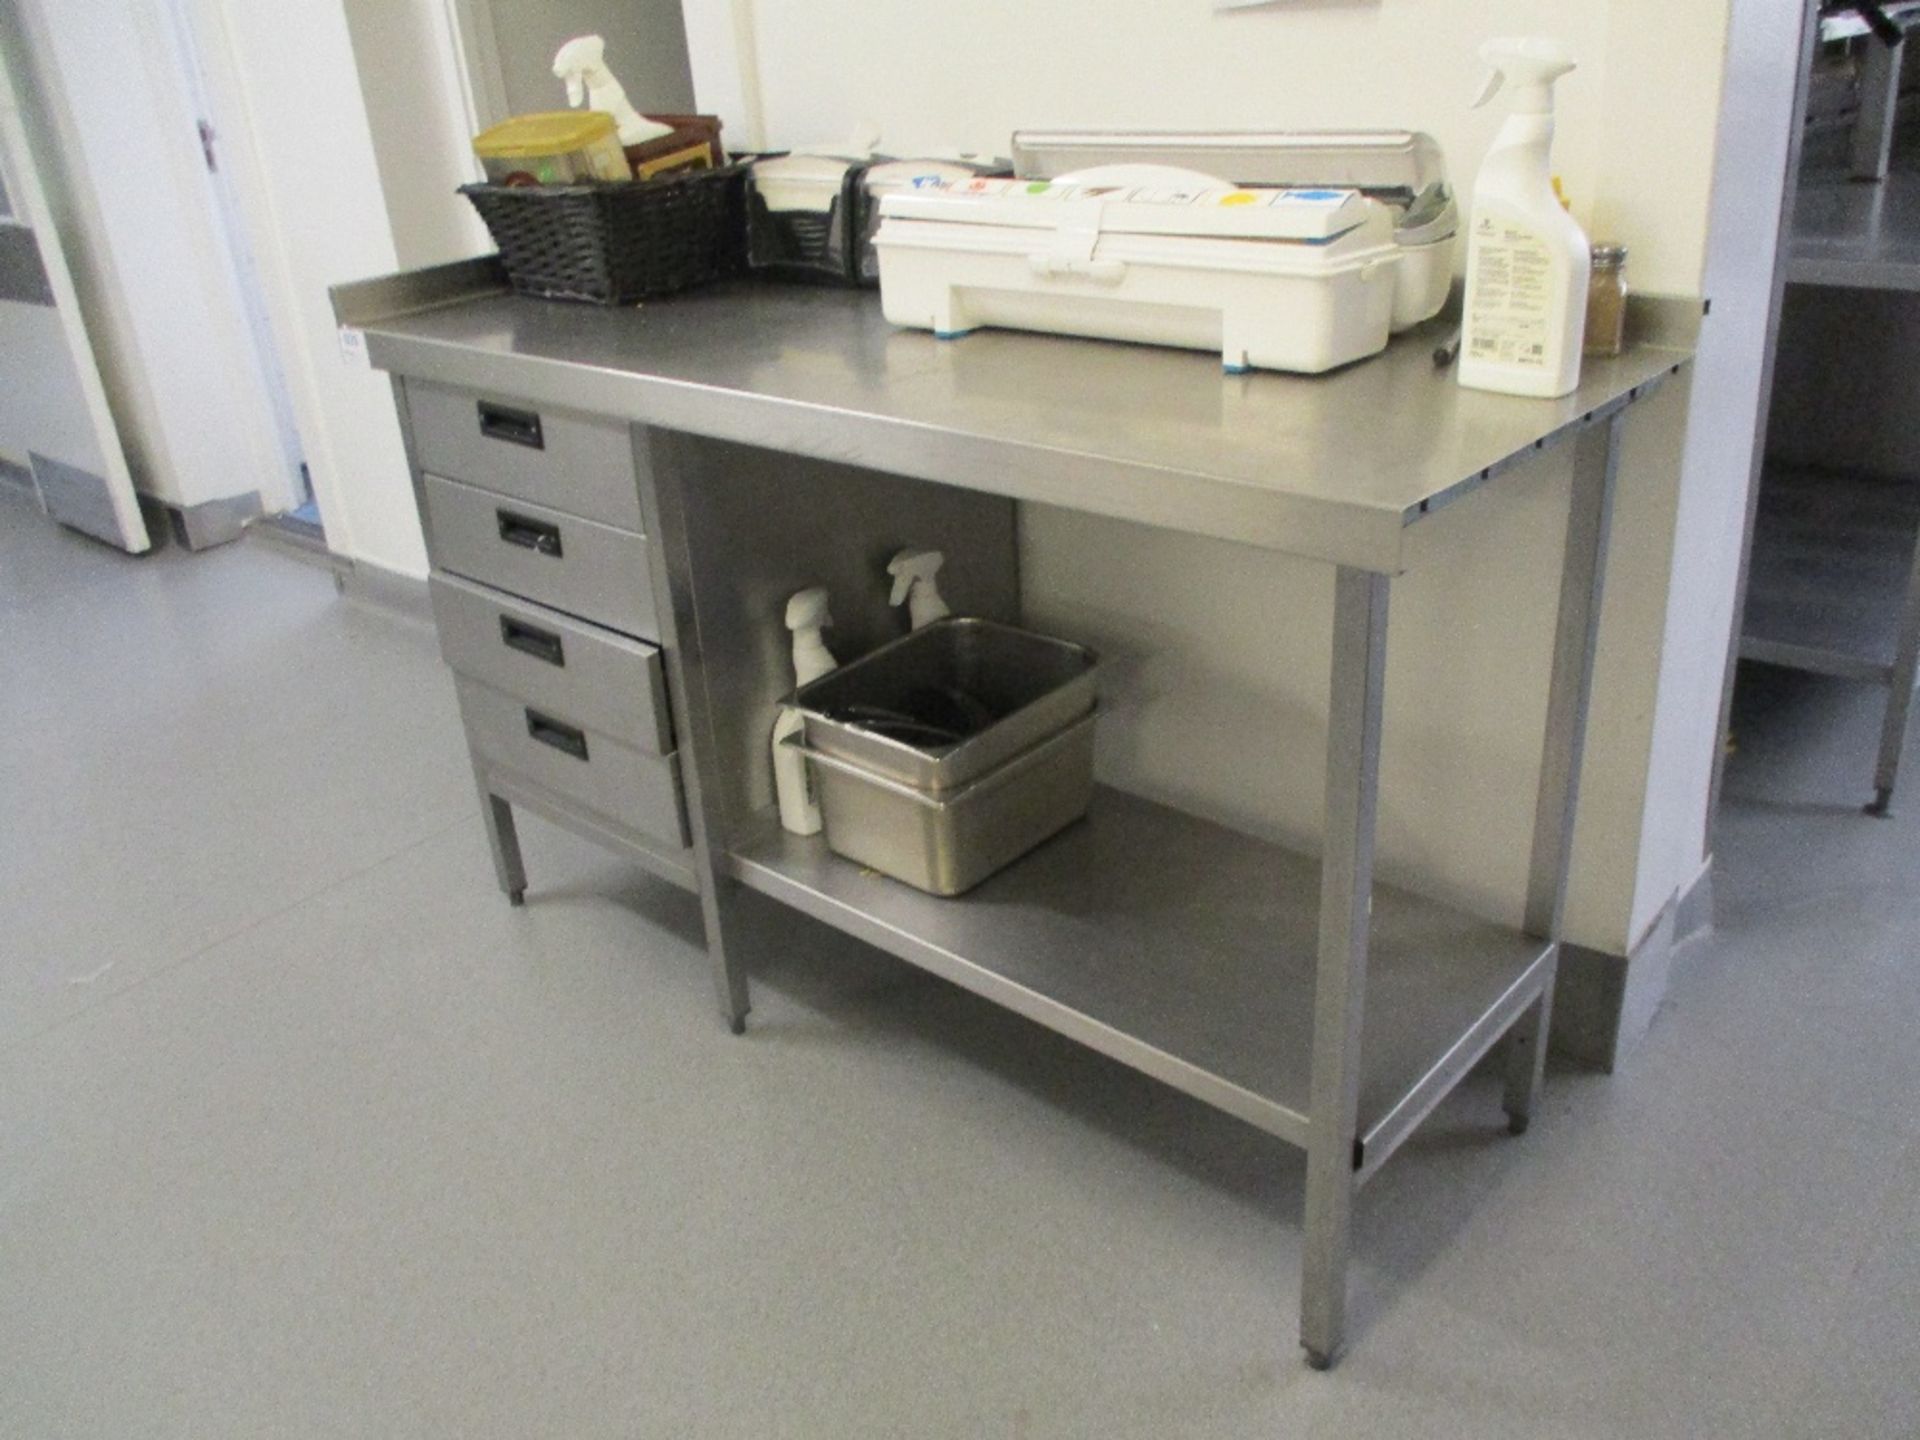 Stainless Steel Prep Table - Image 3 of 3